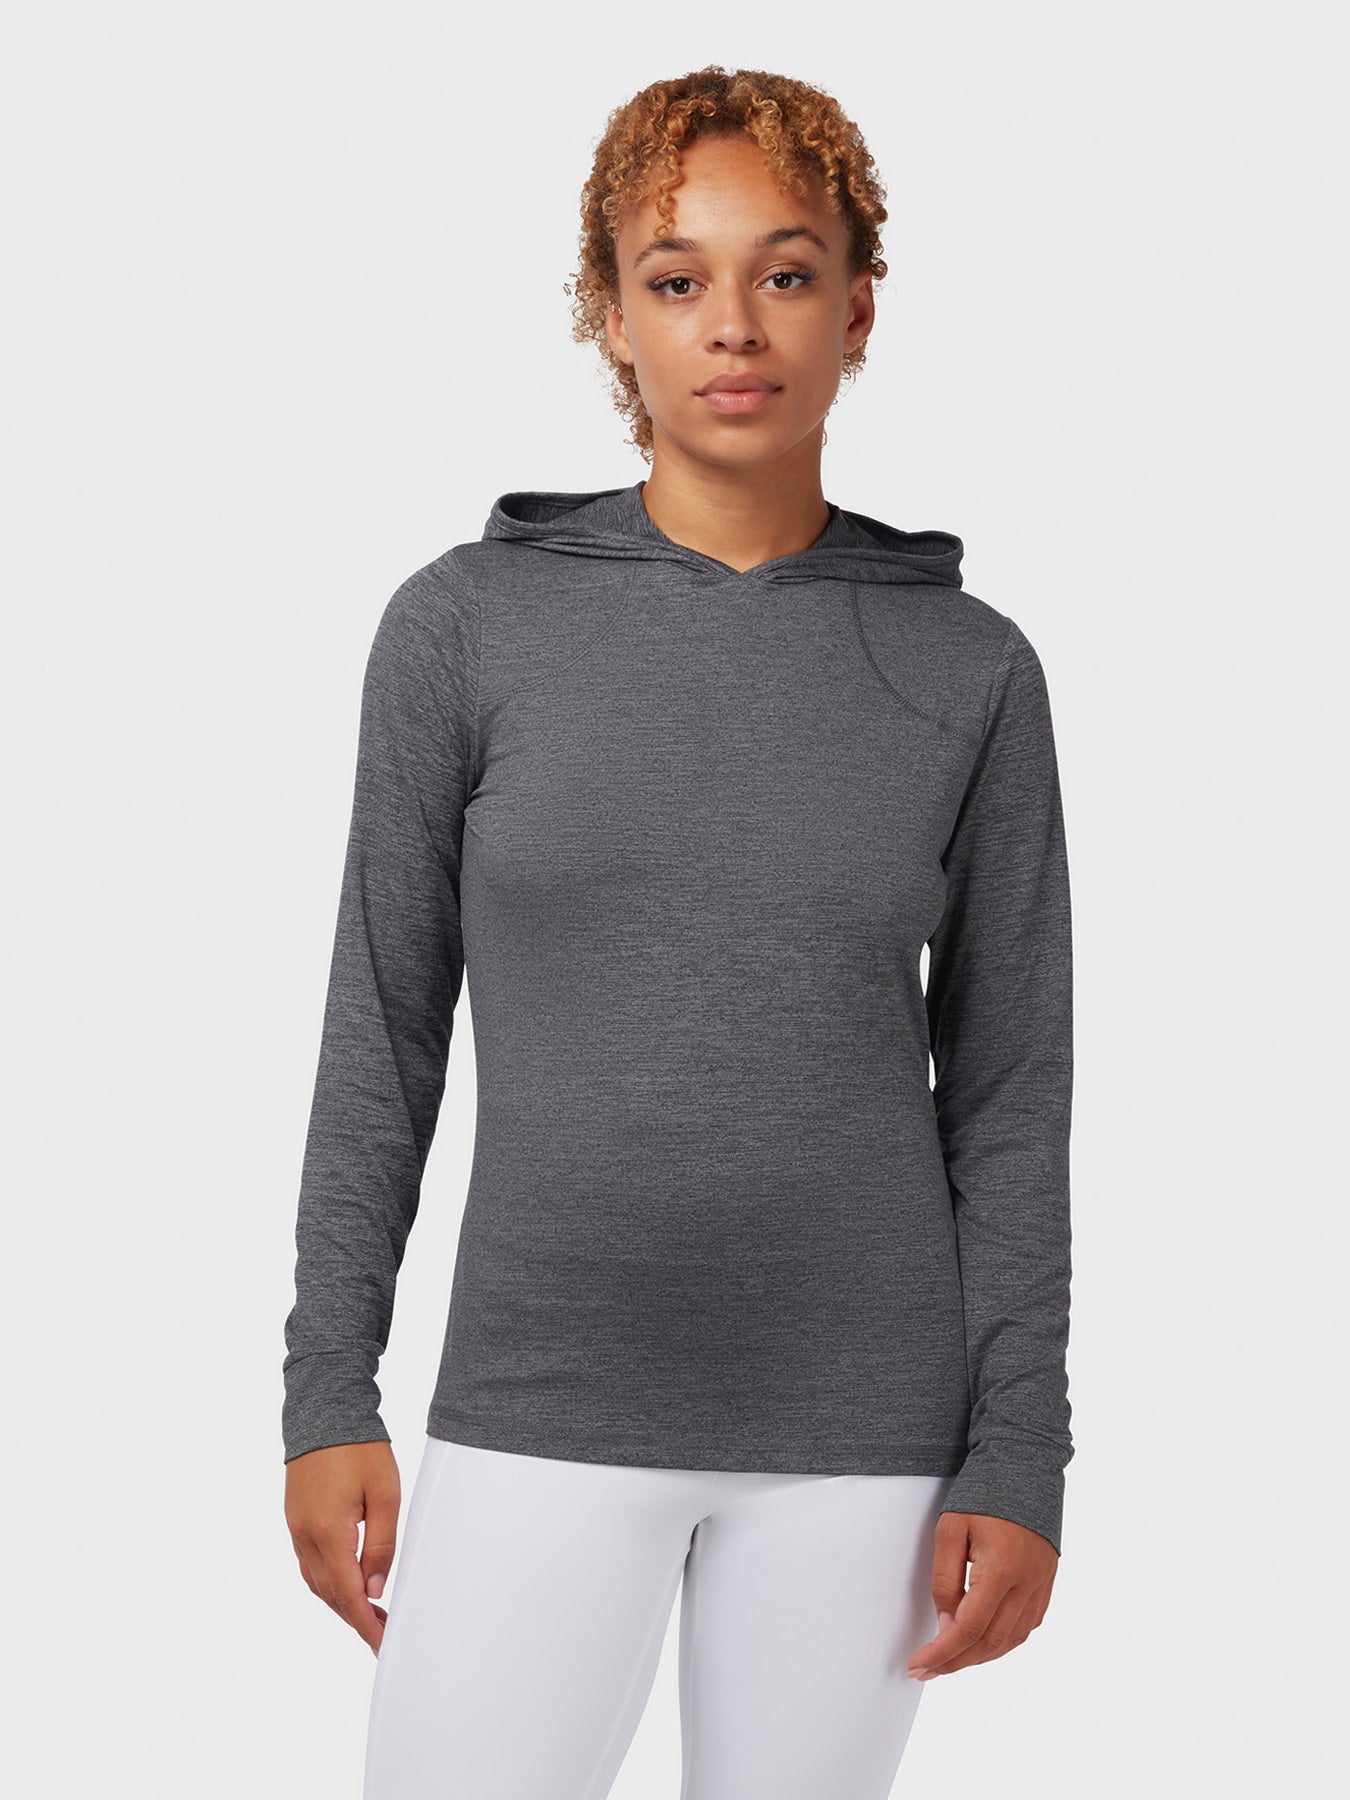 View Brushed Heather Womens Hoodie In Black Heather information